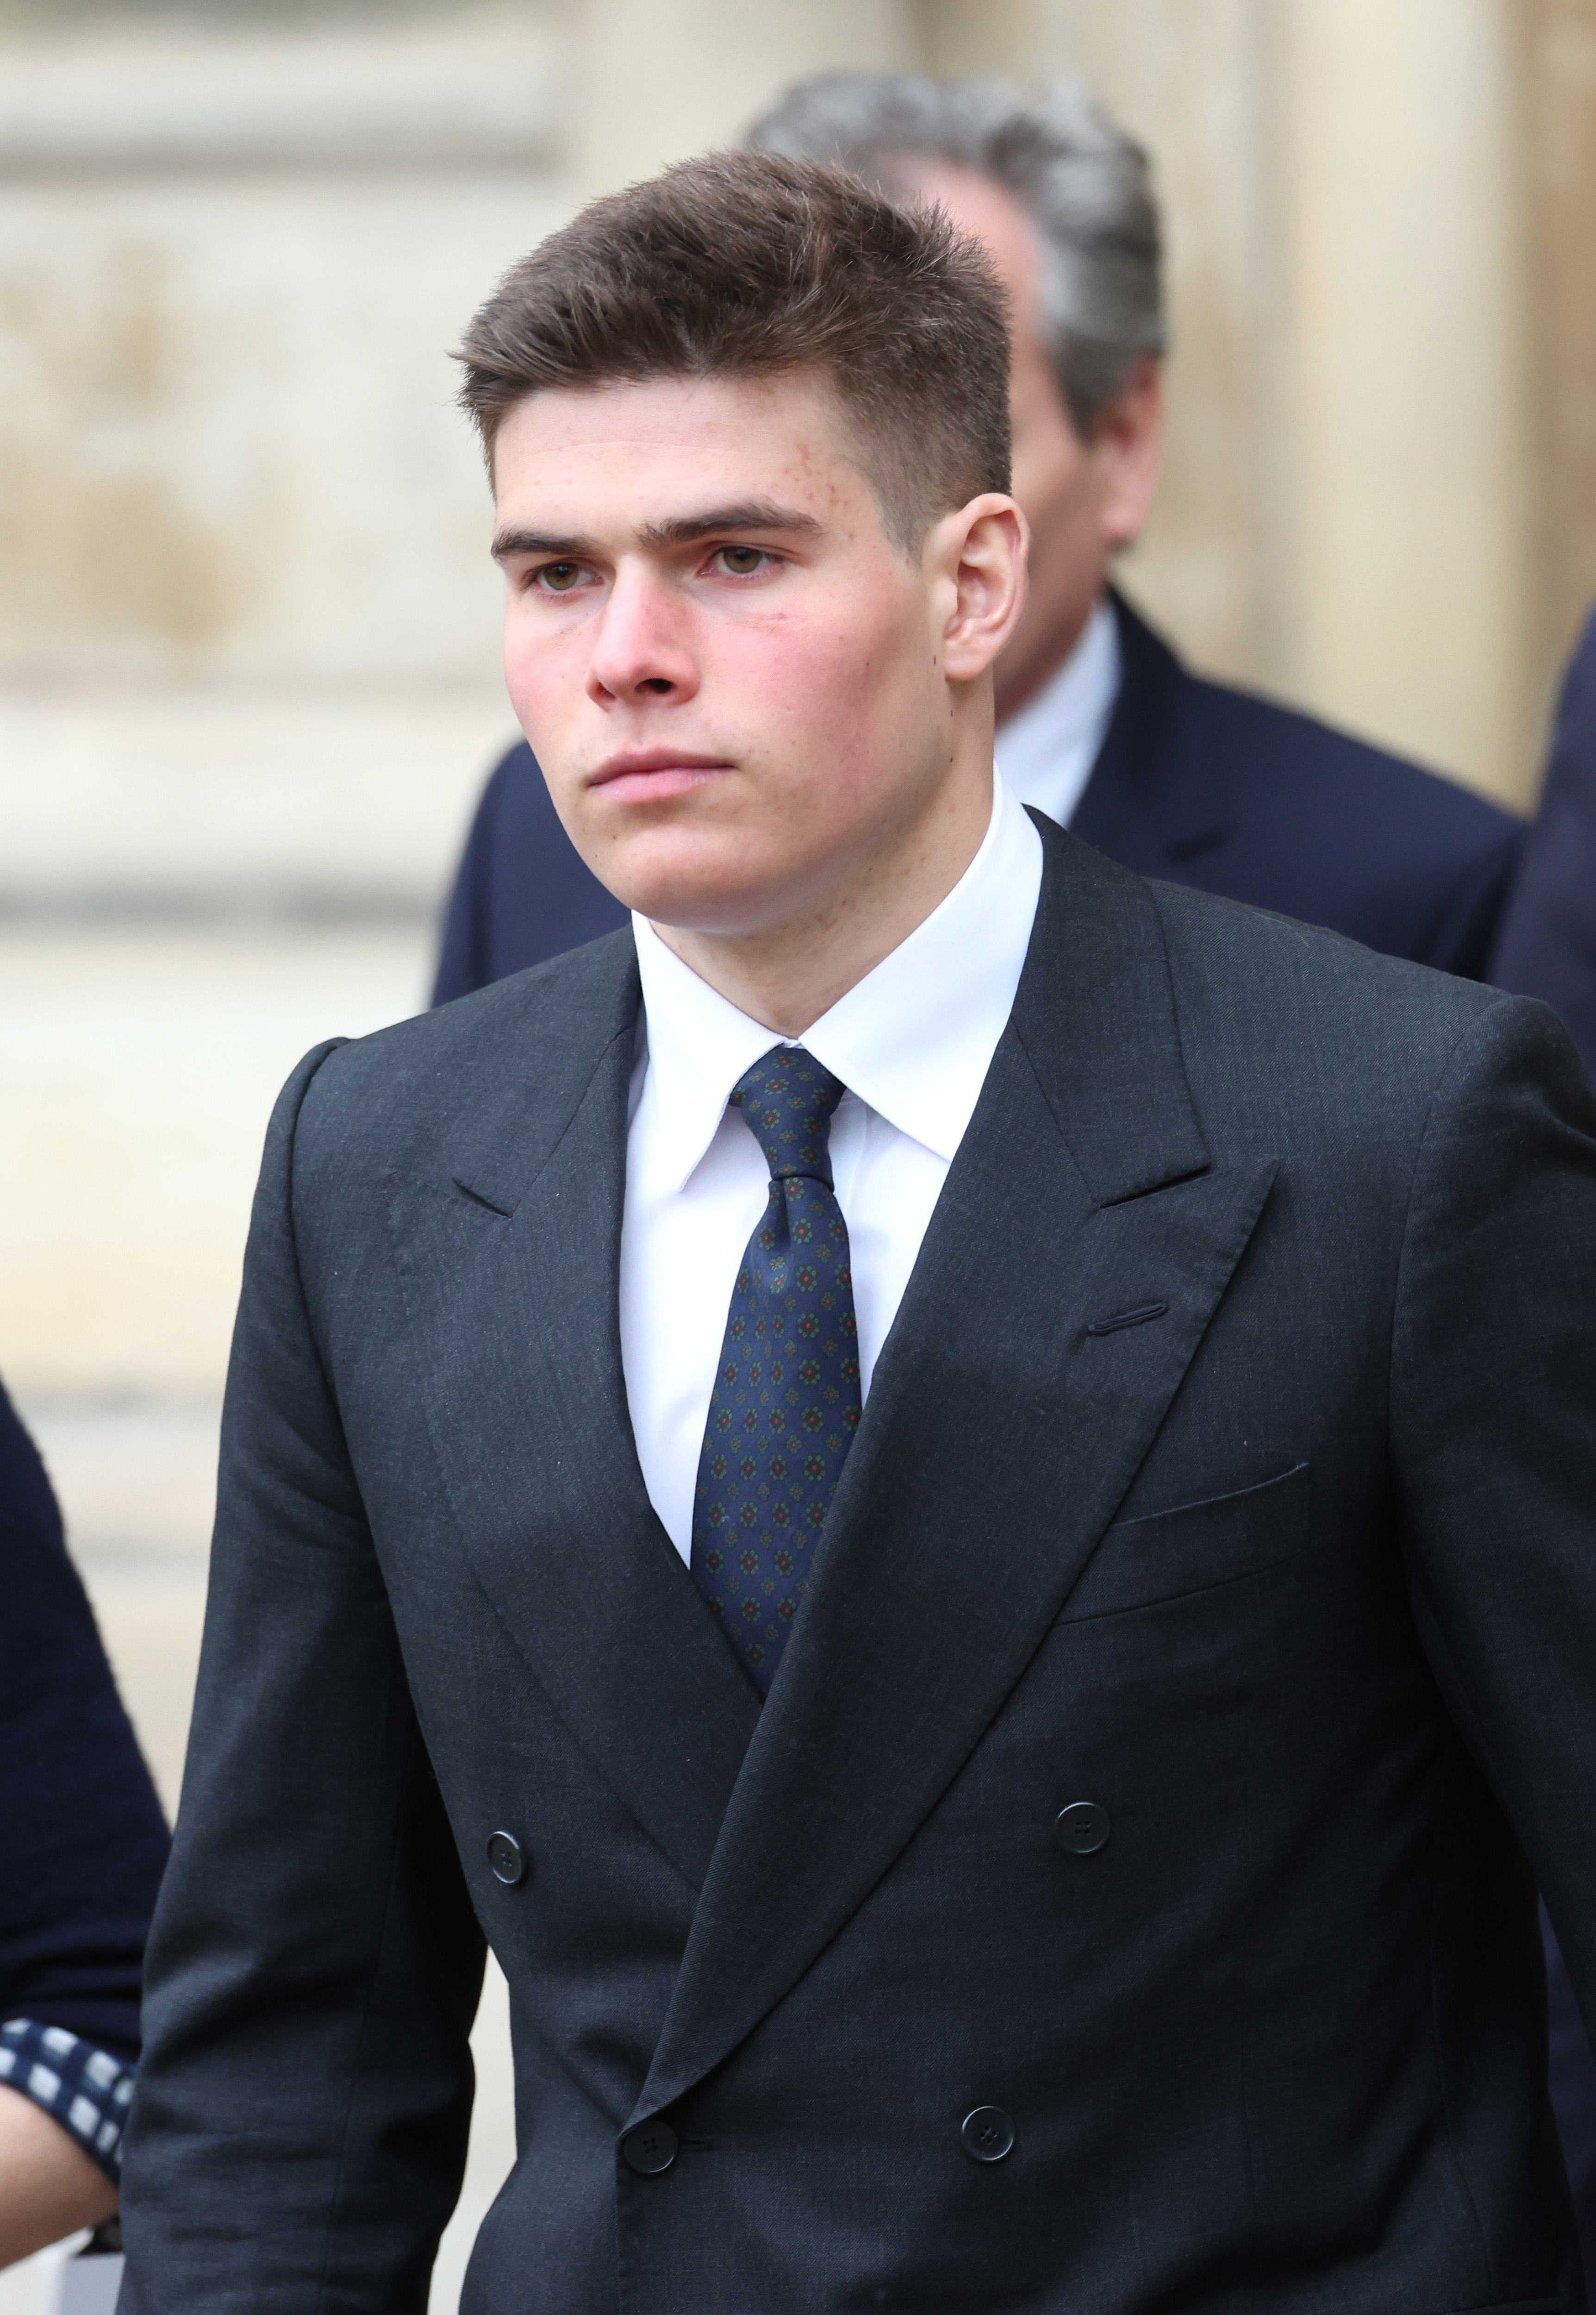 Arthur Chatto attends the memorial service for Prince Phillip at Westminster Abbey on March 29, 2022 in London, England. | Source: Getty Images